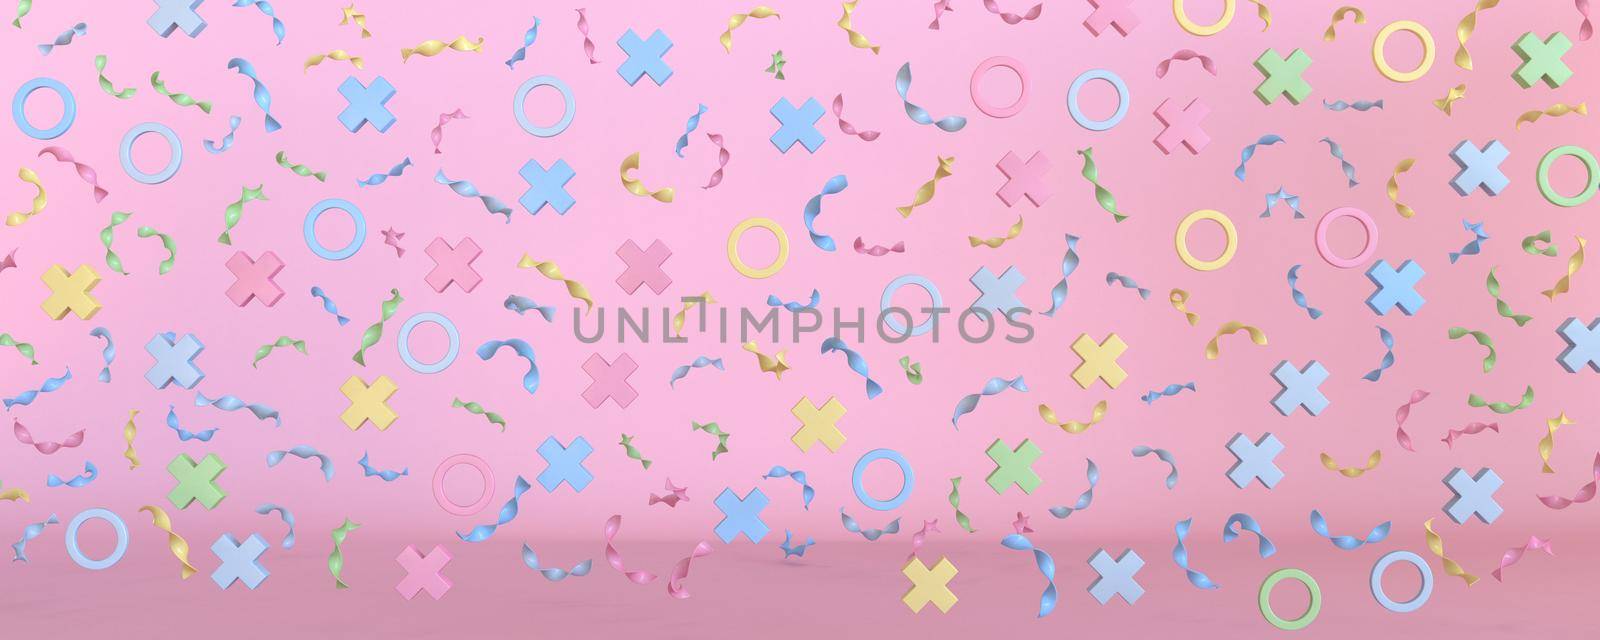 Golden confetti 3D rendering illustration isolated on pink background